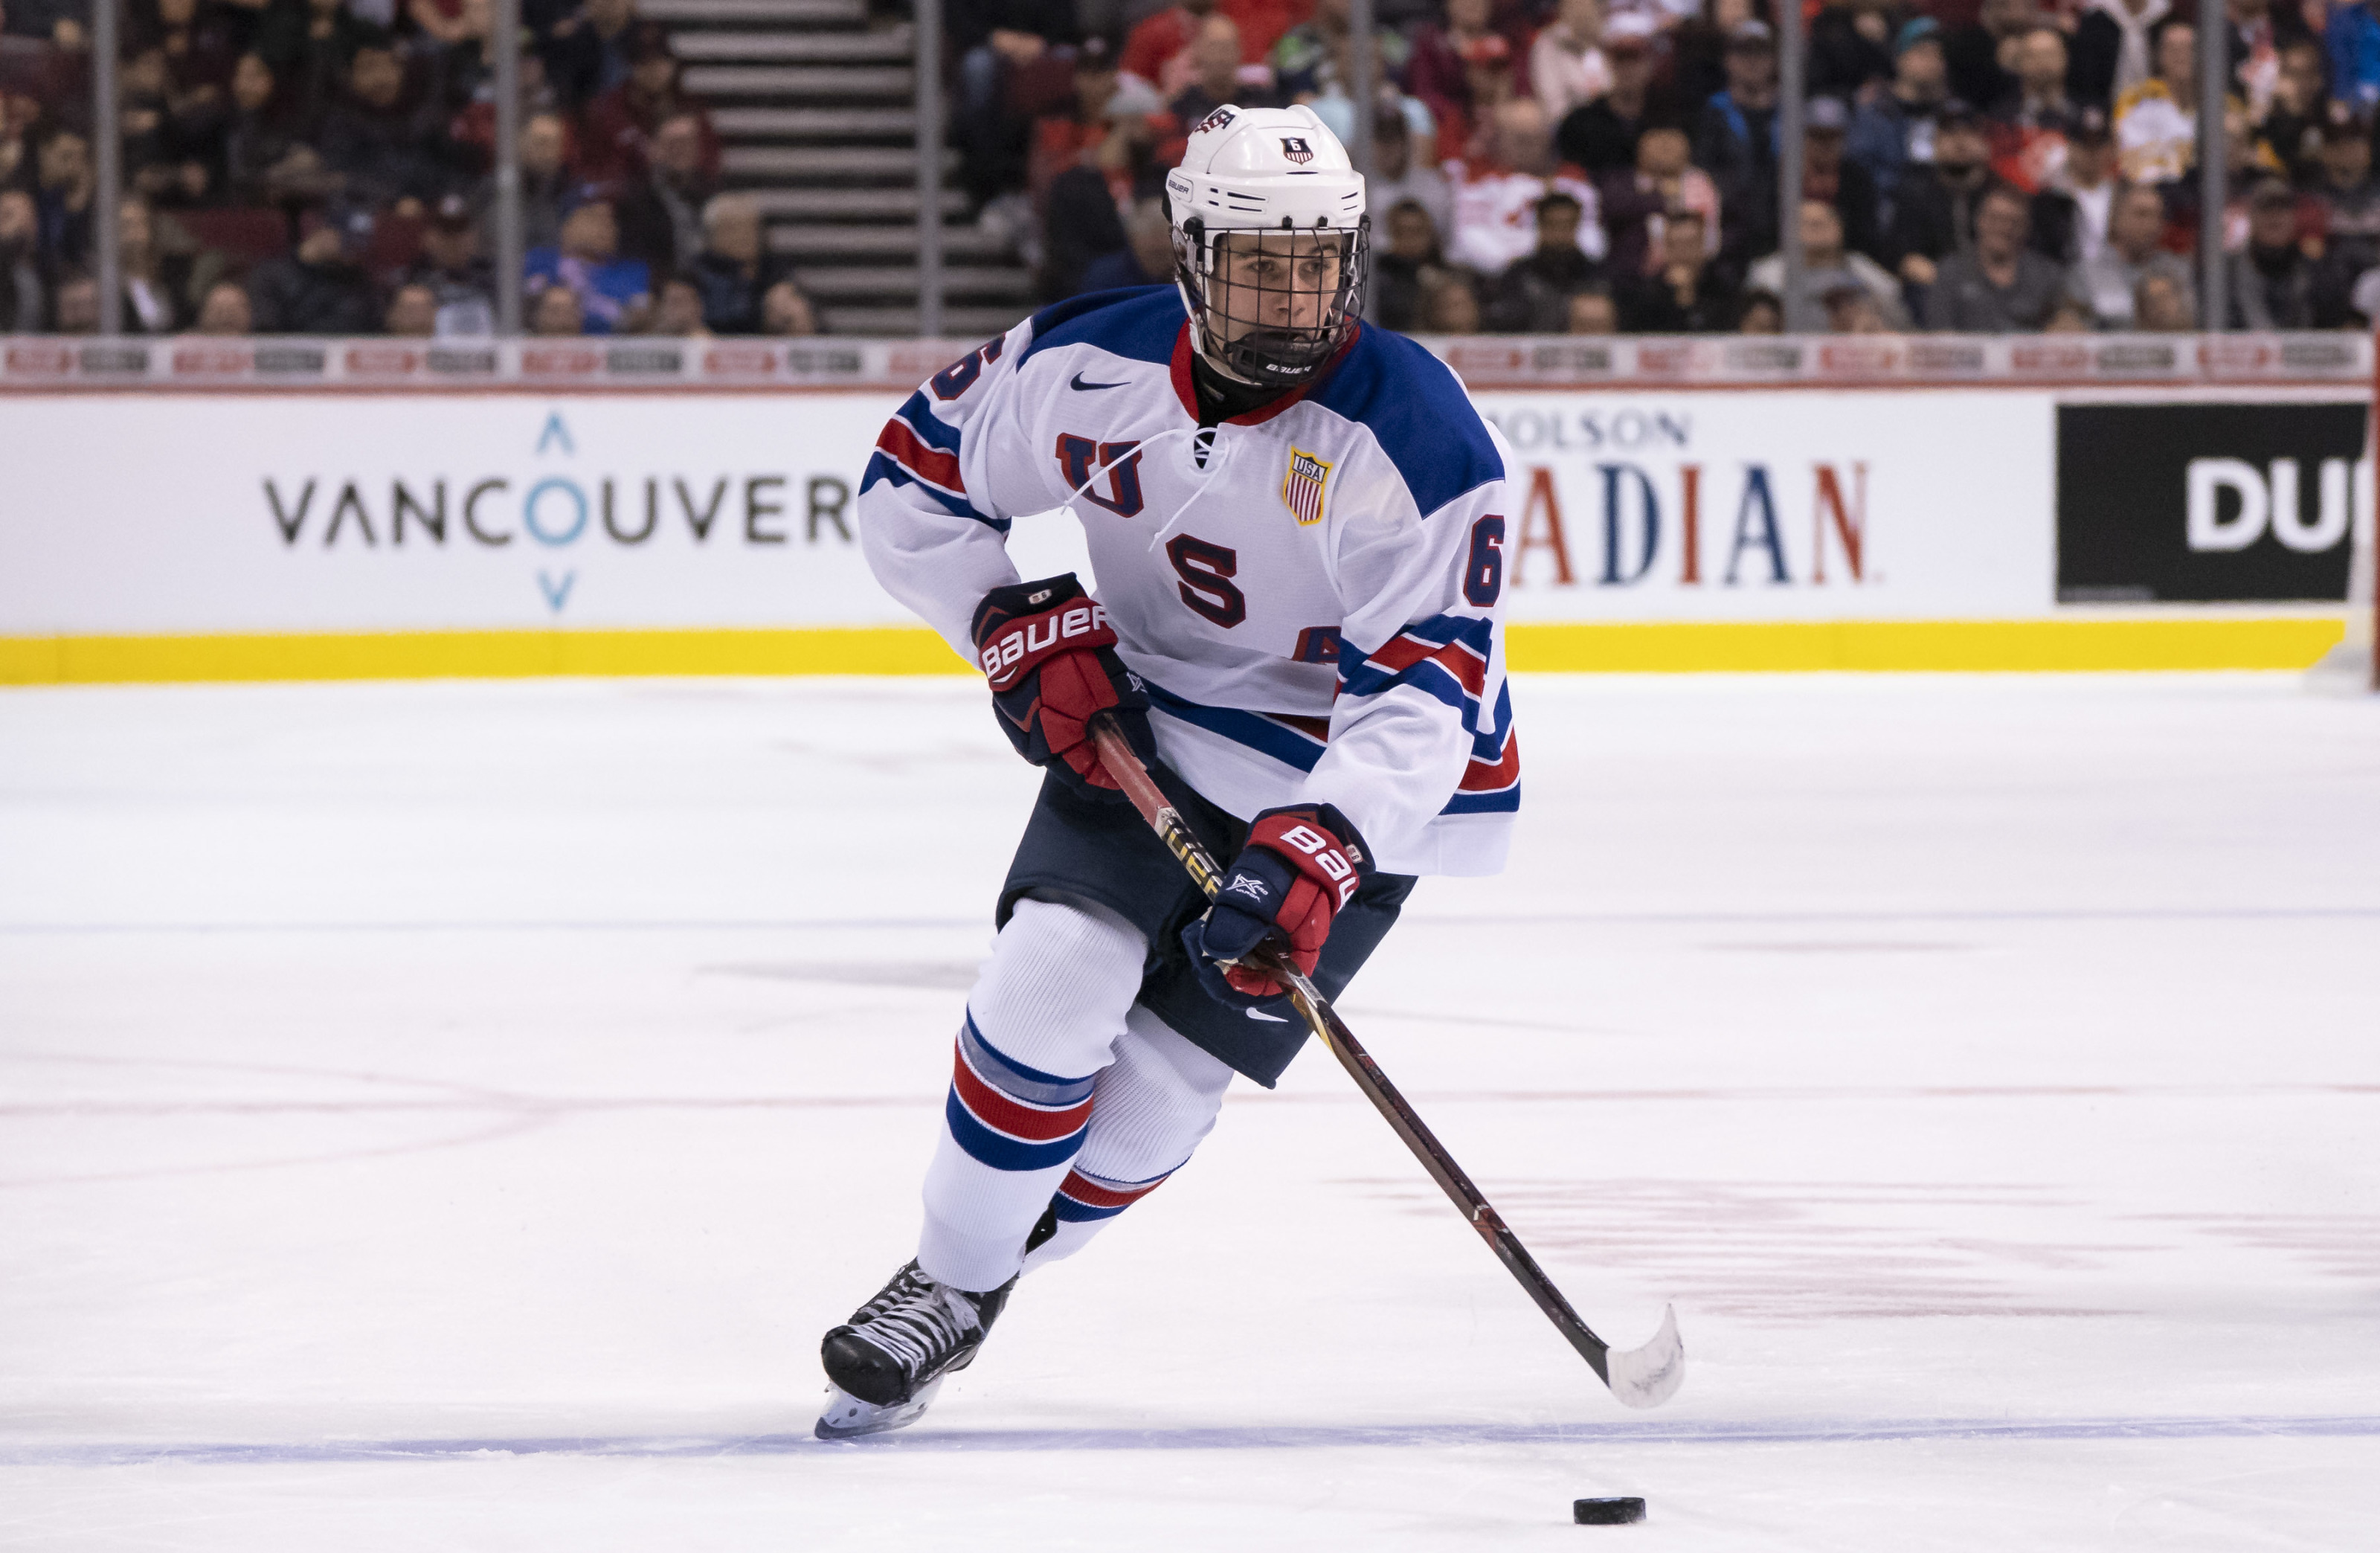 AROUND THE NHL: USA Hockey's Jack Hughes expected No. 1 pick in NHL draft